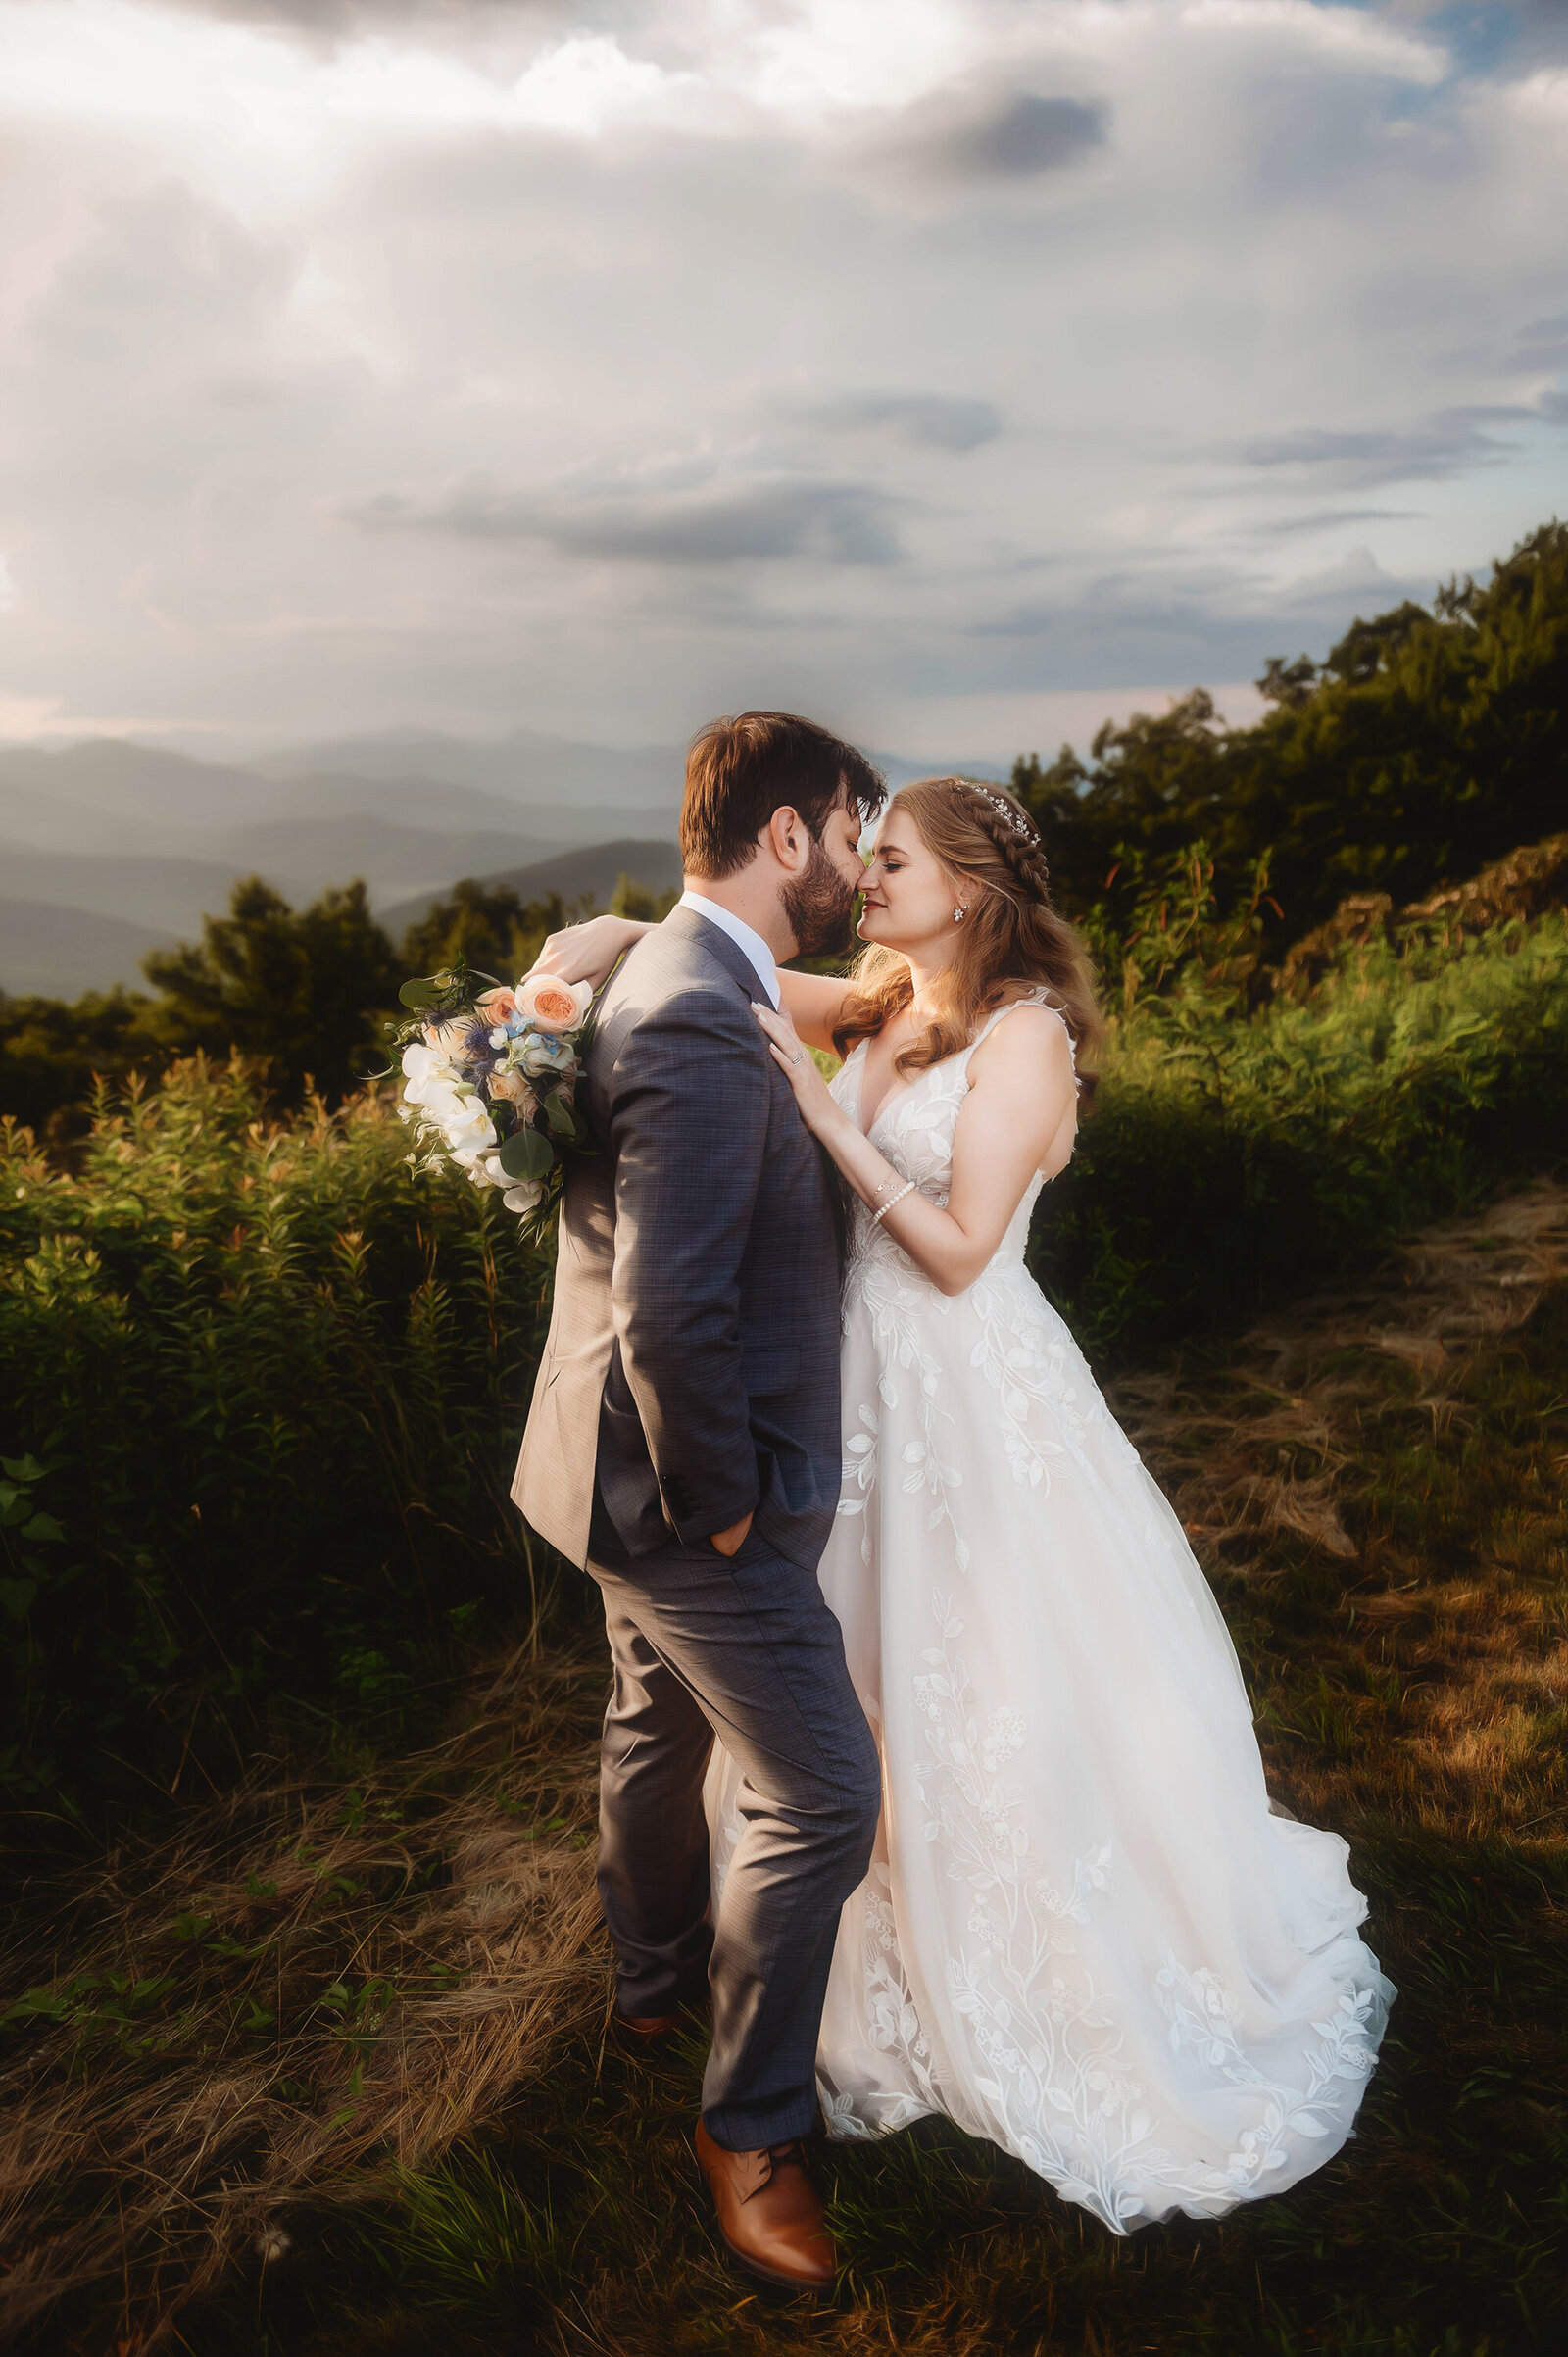 Bride and Groom embrace during their Elopement on the Blue Ridge Parkway in Asheville, NC.